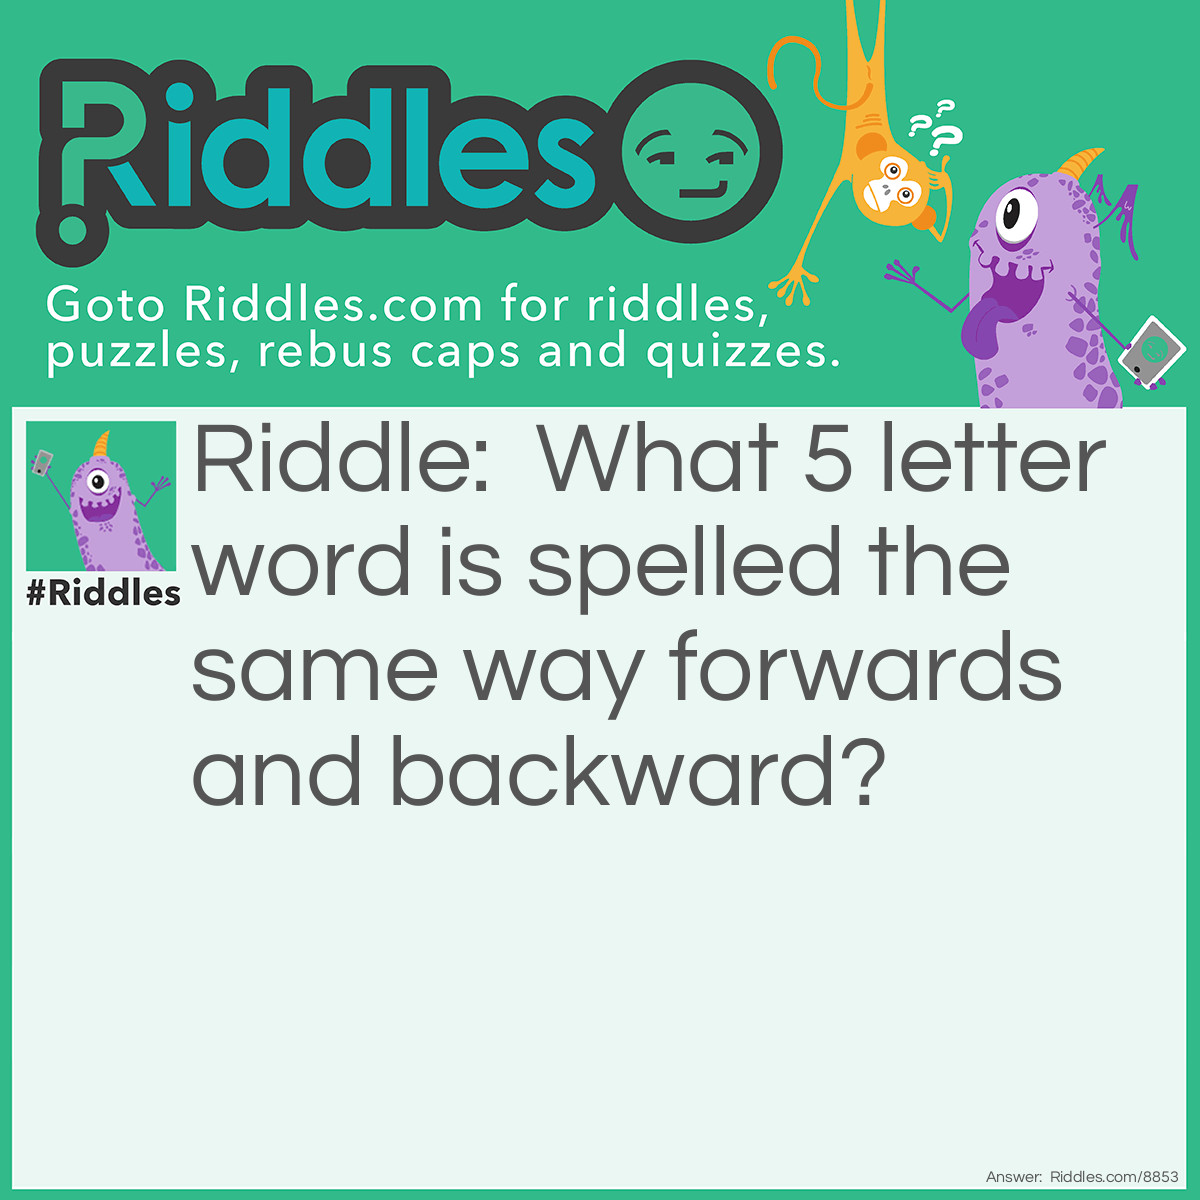 Riddle: What 5 letter word is spelled the same way forwards and backward? Answer: Radar.